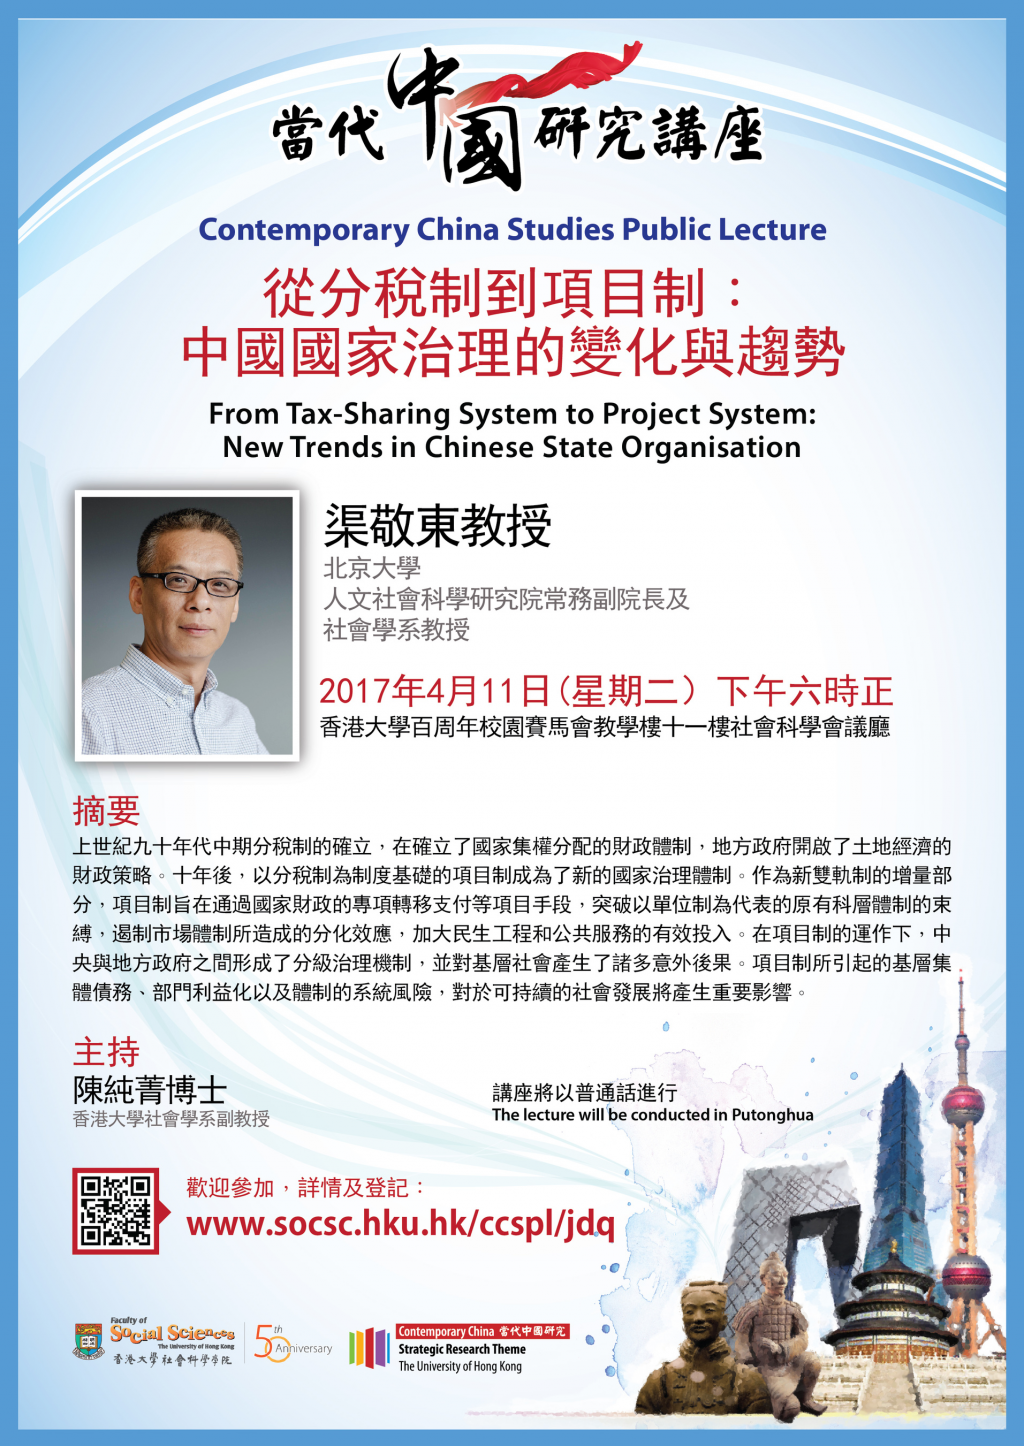 From Tax-Sharing System to Project System: New Trends in Chinese State Organisation